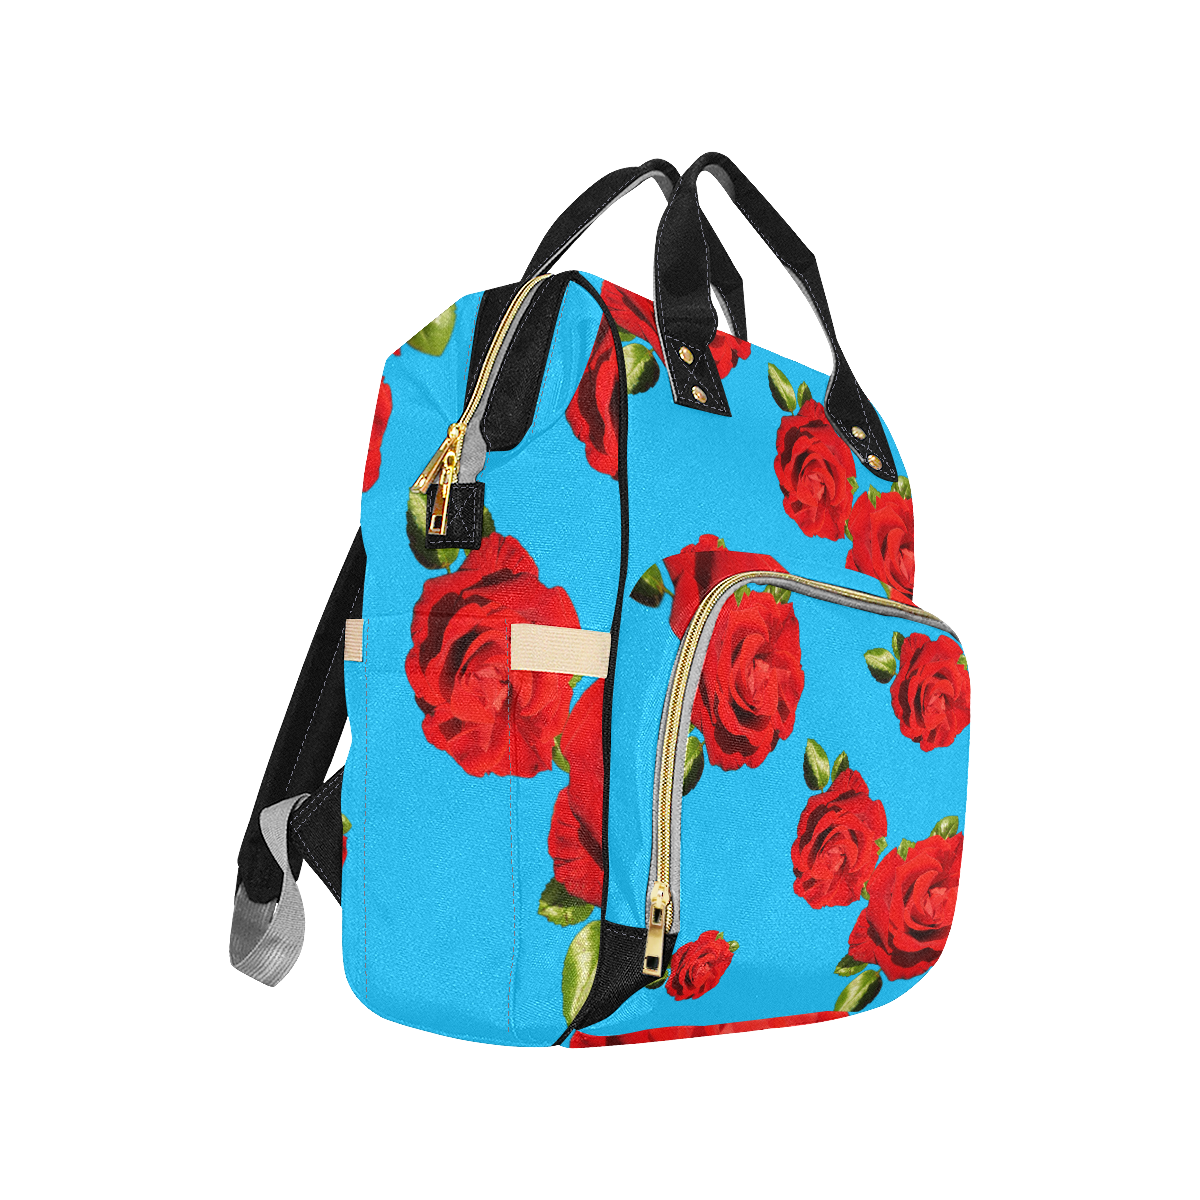 Fairlings Delight's Floral Luxury Collection- Red Rose Multi-Function Diaper Backpack 53086c15 Multi-Function Diaper Backpack/Diaper Bag (Model 1688)